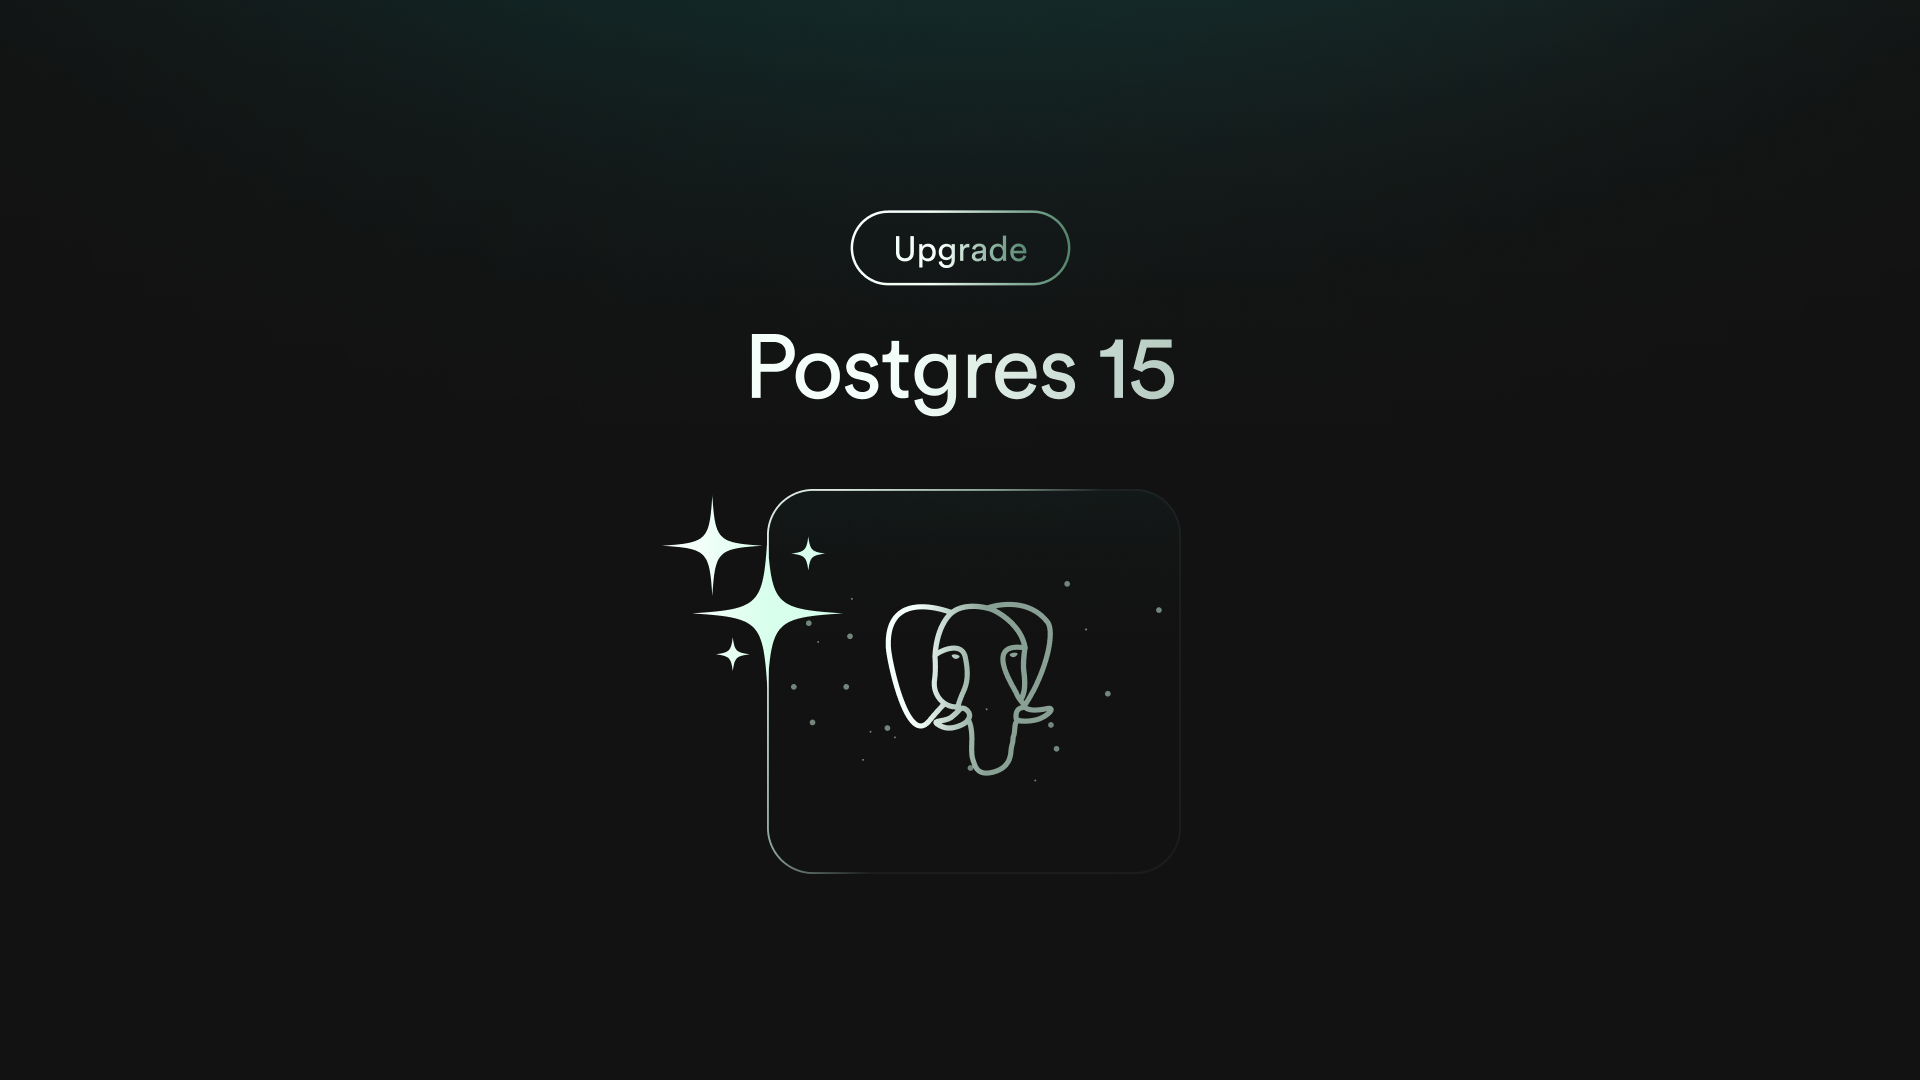 What's new in Postgres 15?